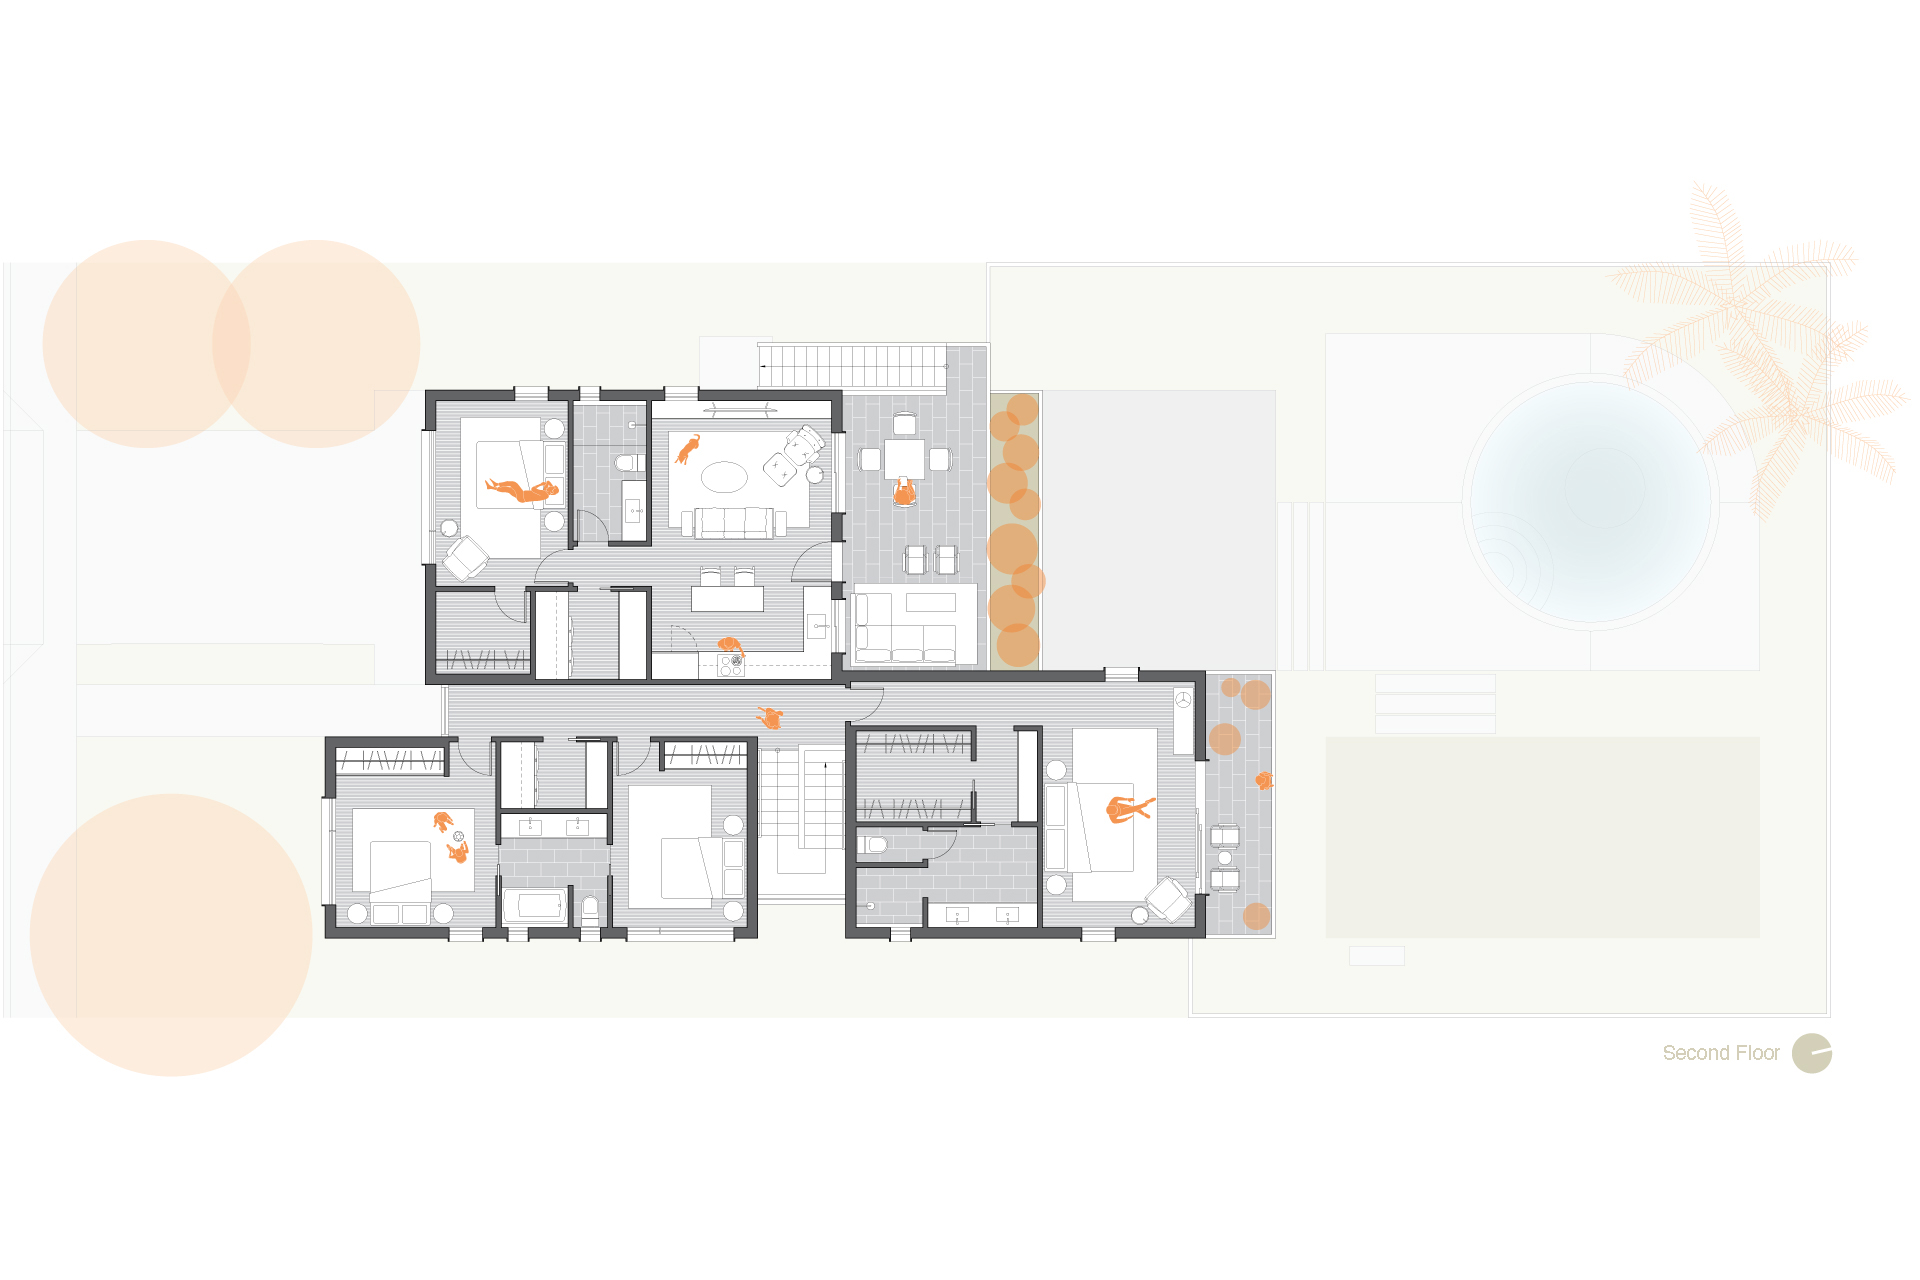 Second floor plan of the new modern home.